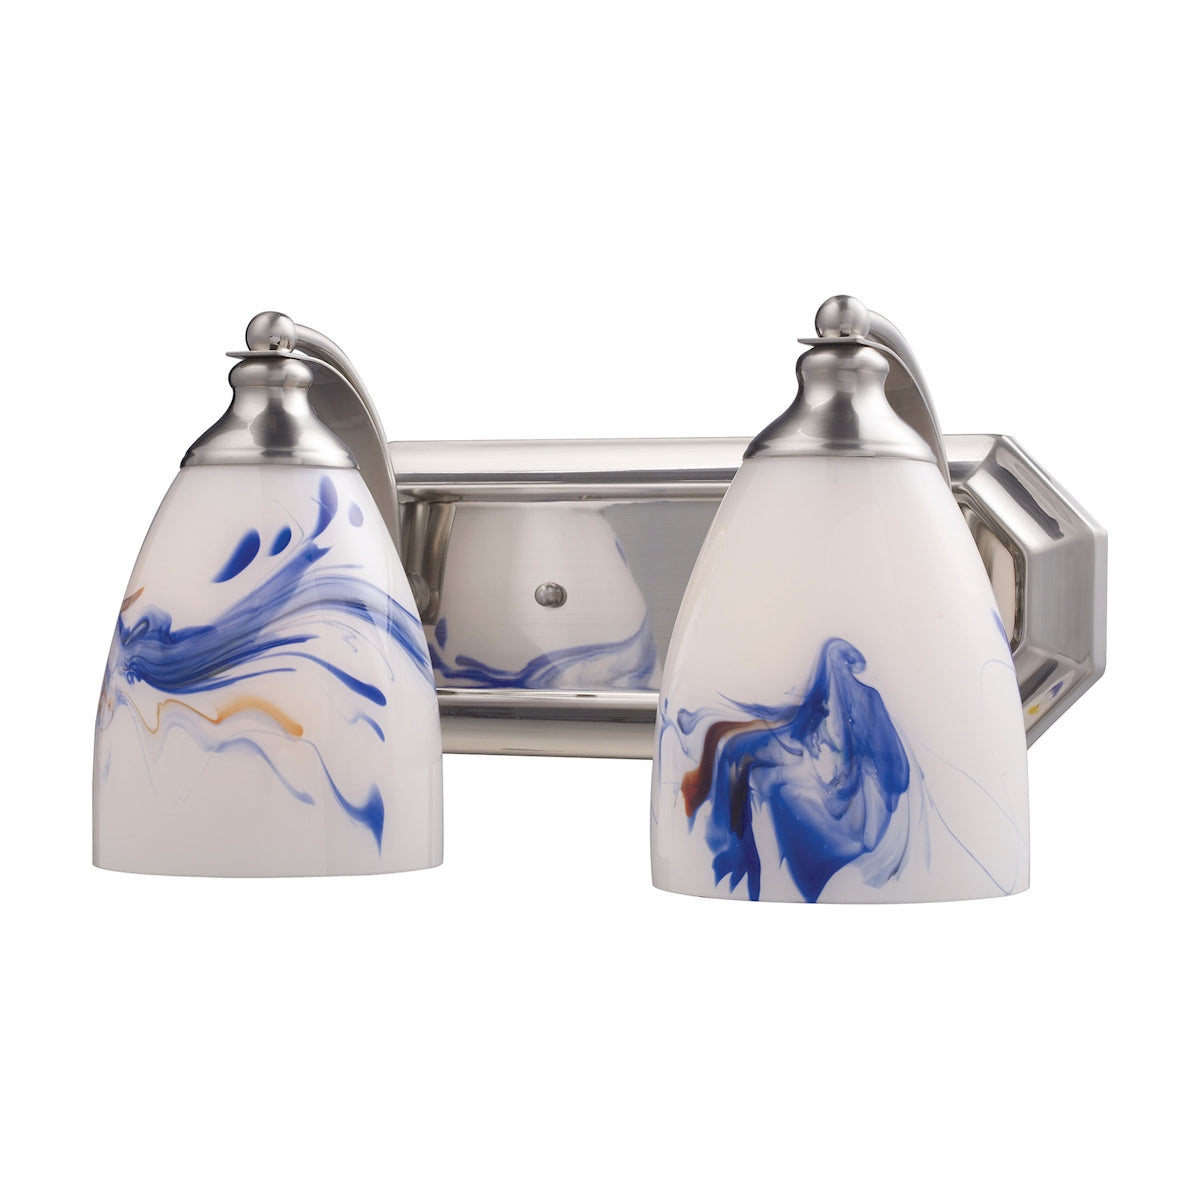 Mix-N-Match Vanity 2-Light Wall Lamp in Satin Nickel with Mountain Glass